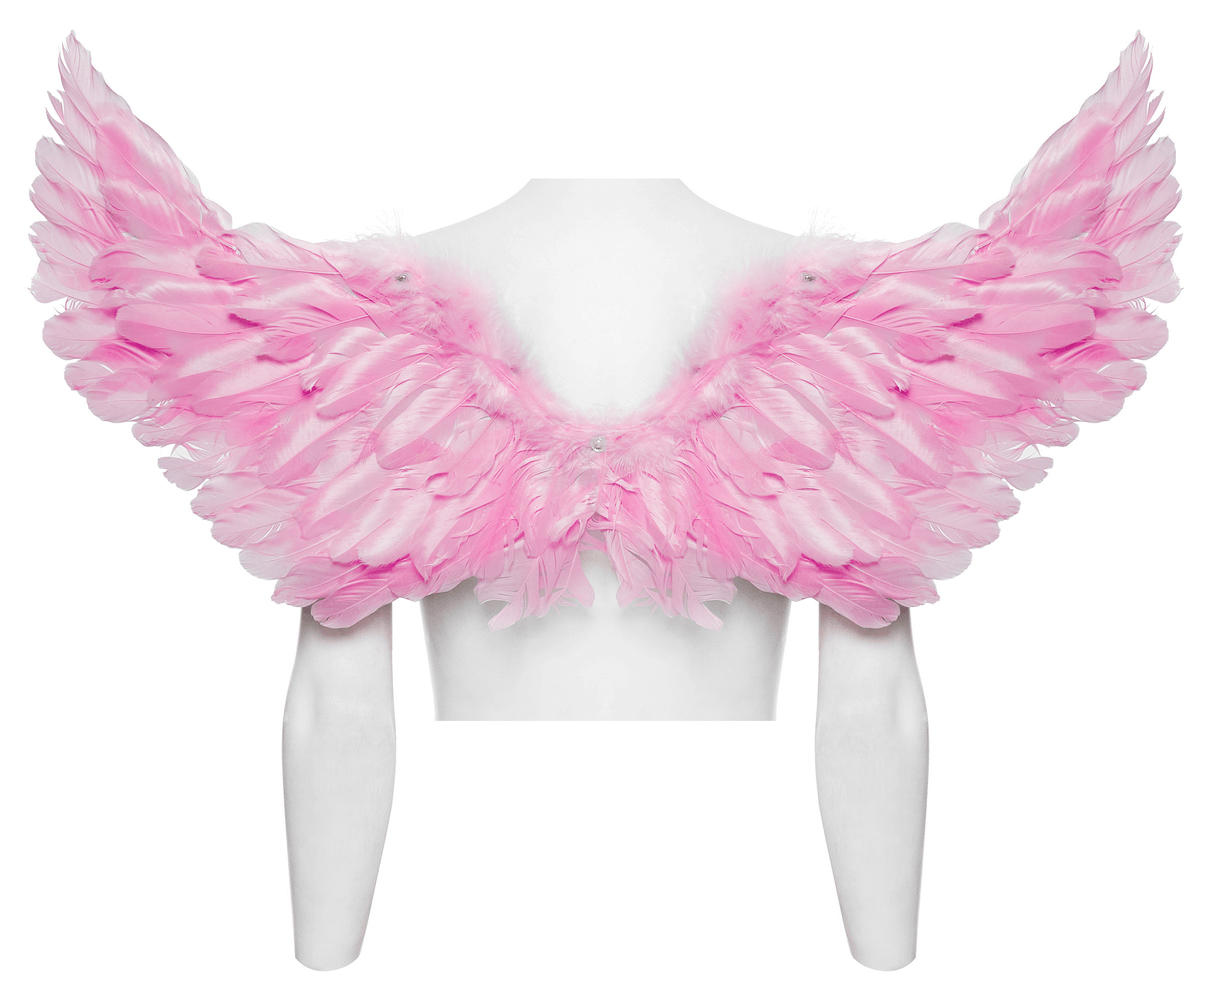 Chic Pink Angel Wings with Silver Chains Harness